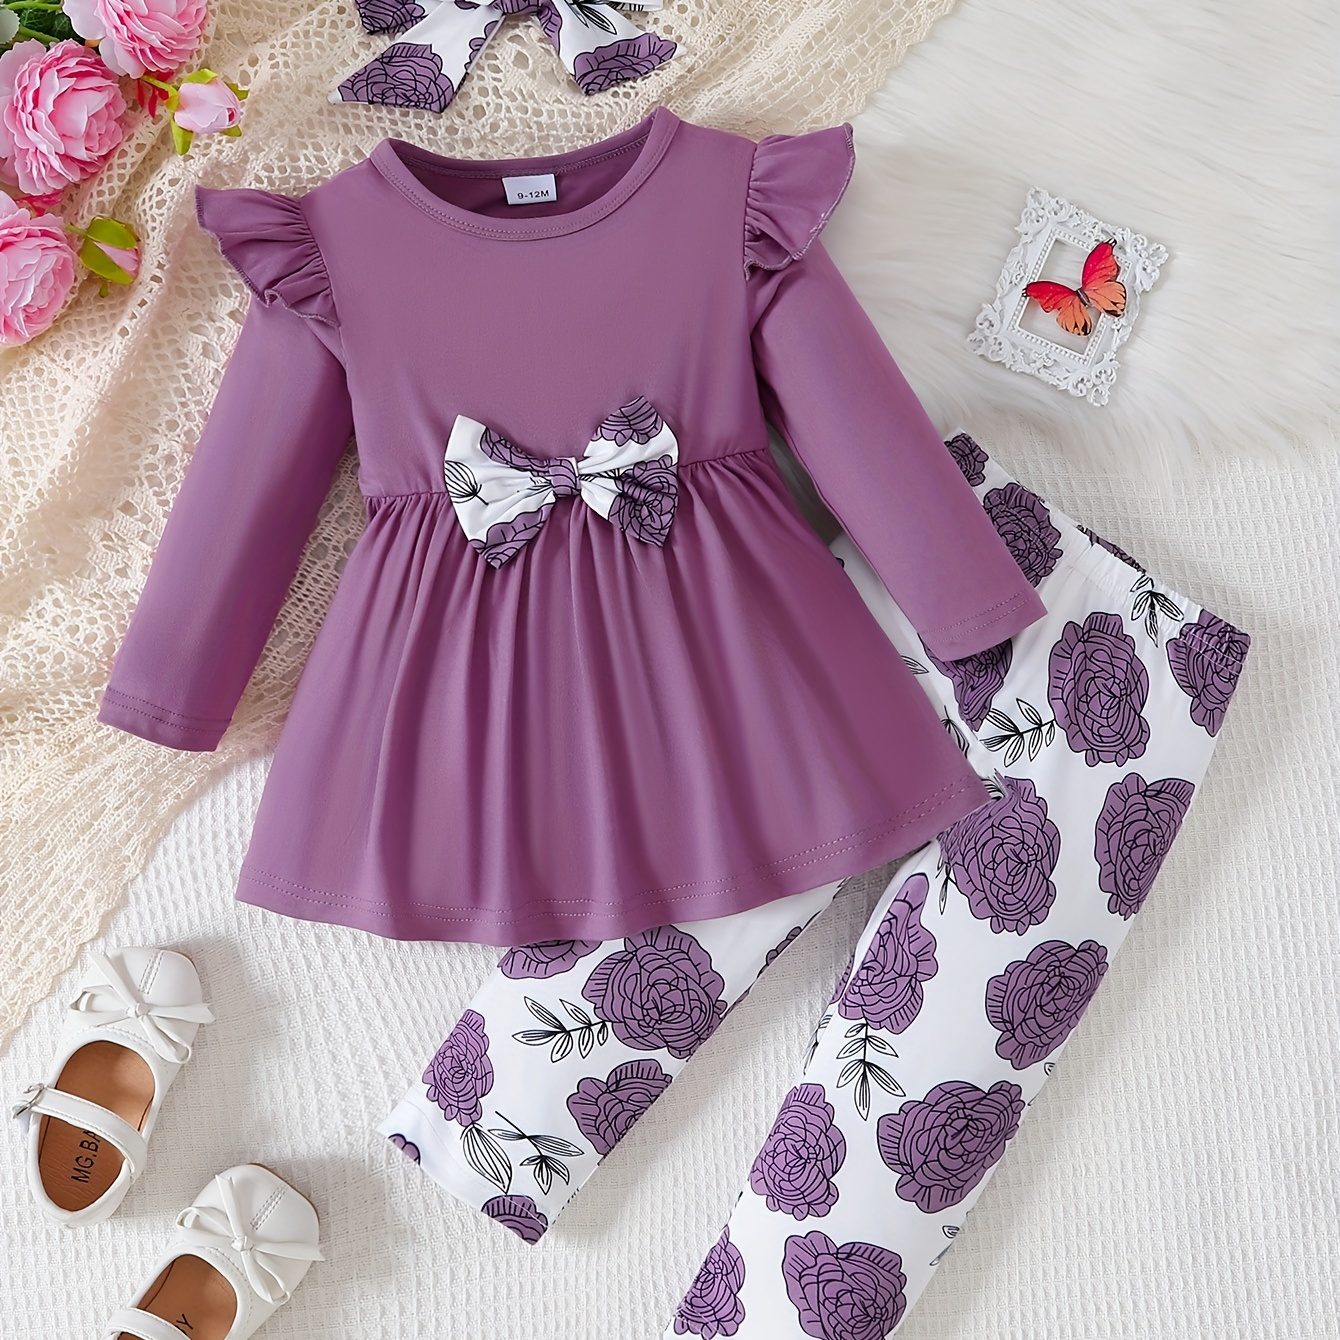 

Casual Girl's Cute 3pcs Outfits, Toddler's Long-sleeved Flutter Sleeve Bow Dres Top + Flower Print Pants + Headscarf Set